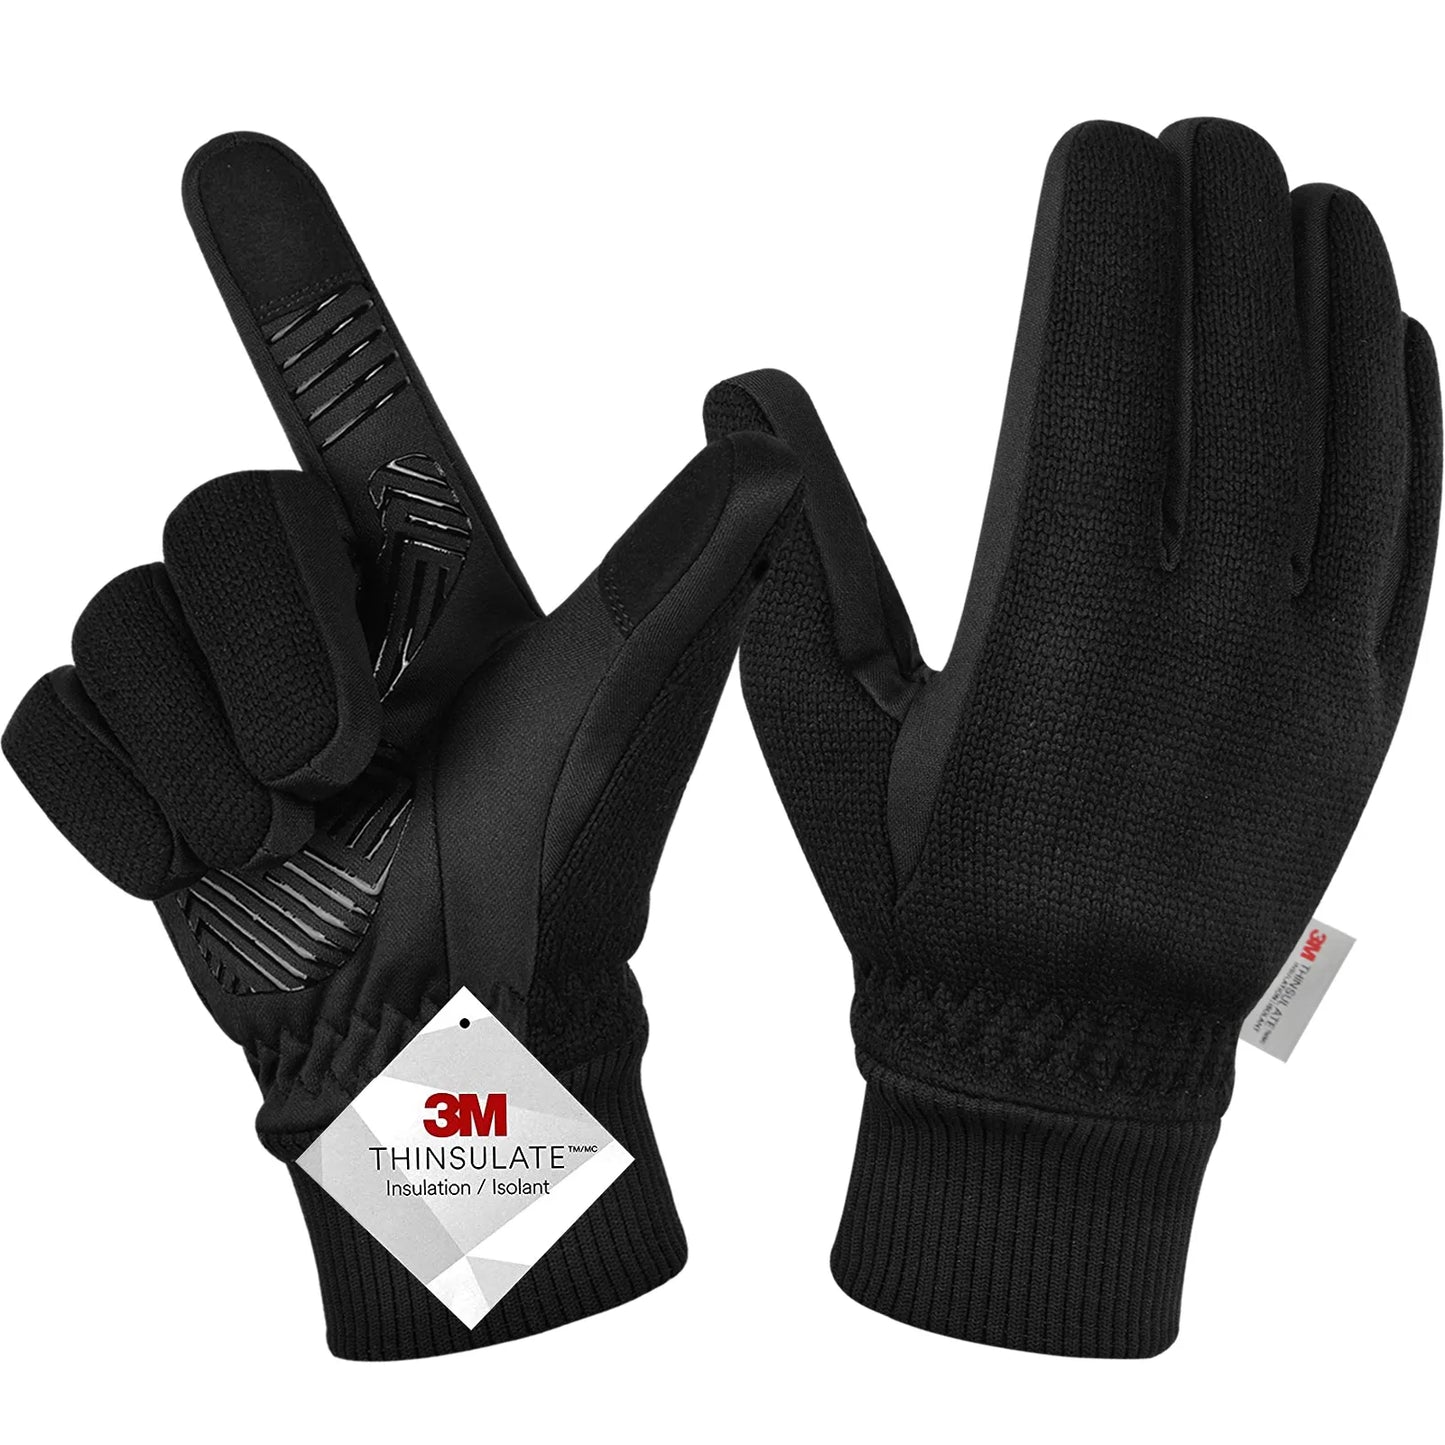 Winter Gloves -10°F 3M Thinsulate Warm Gloves Bike Gloves Cycling Gloves for Driving/Cycling/Running/Hiking